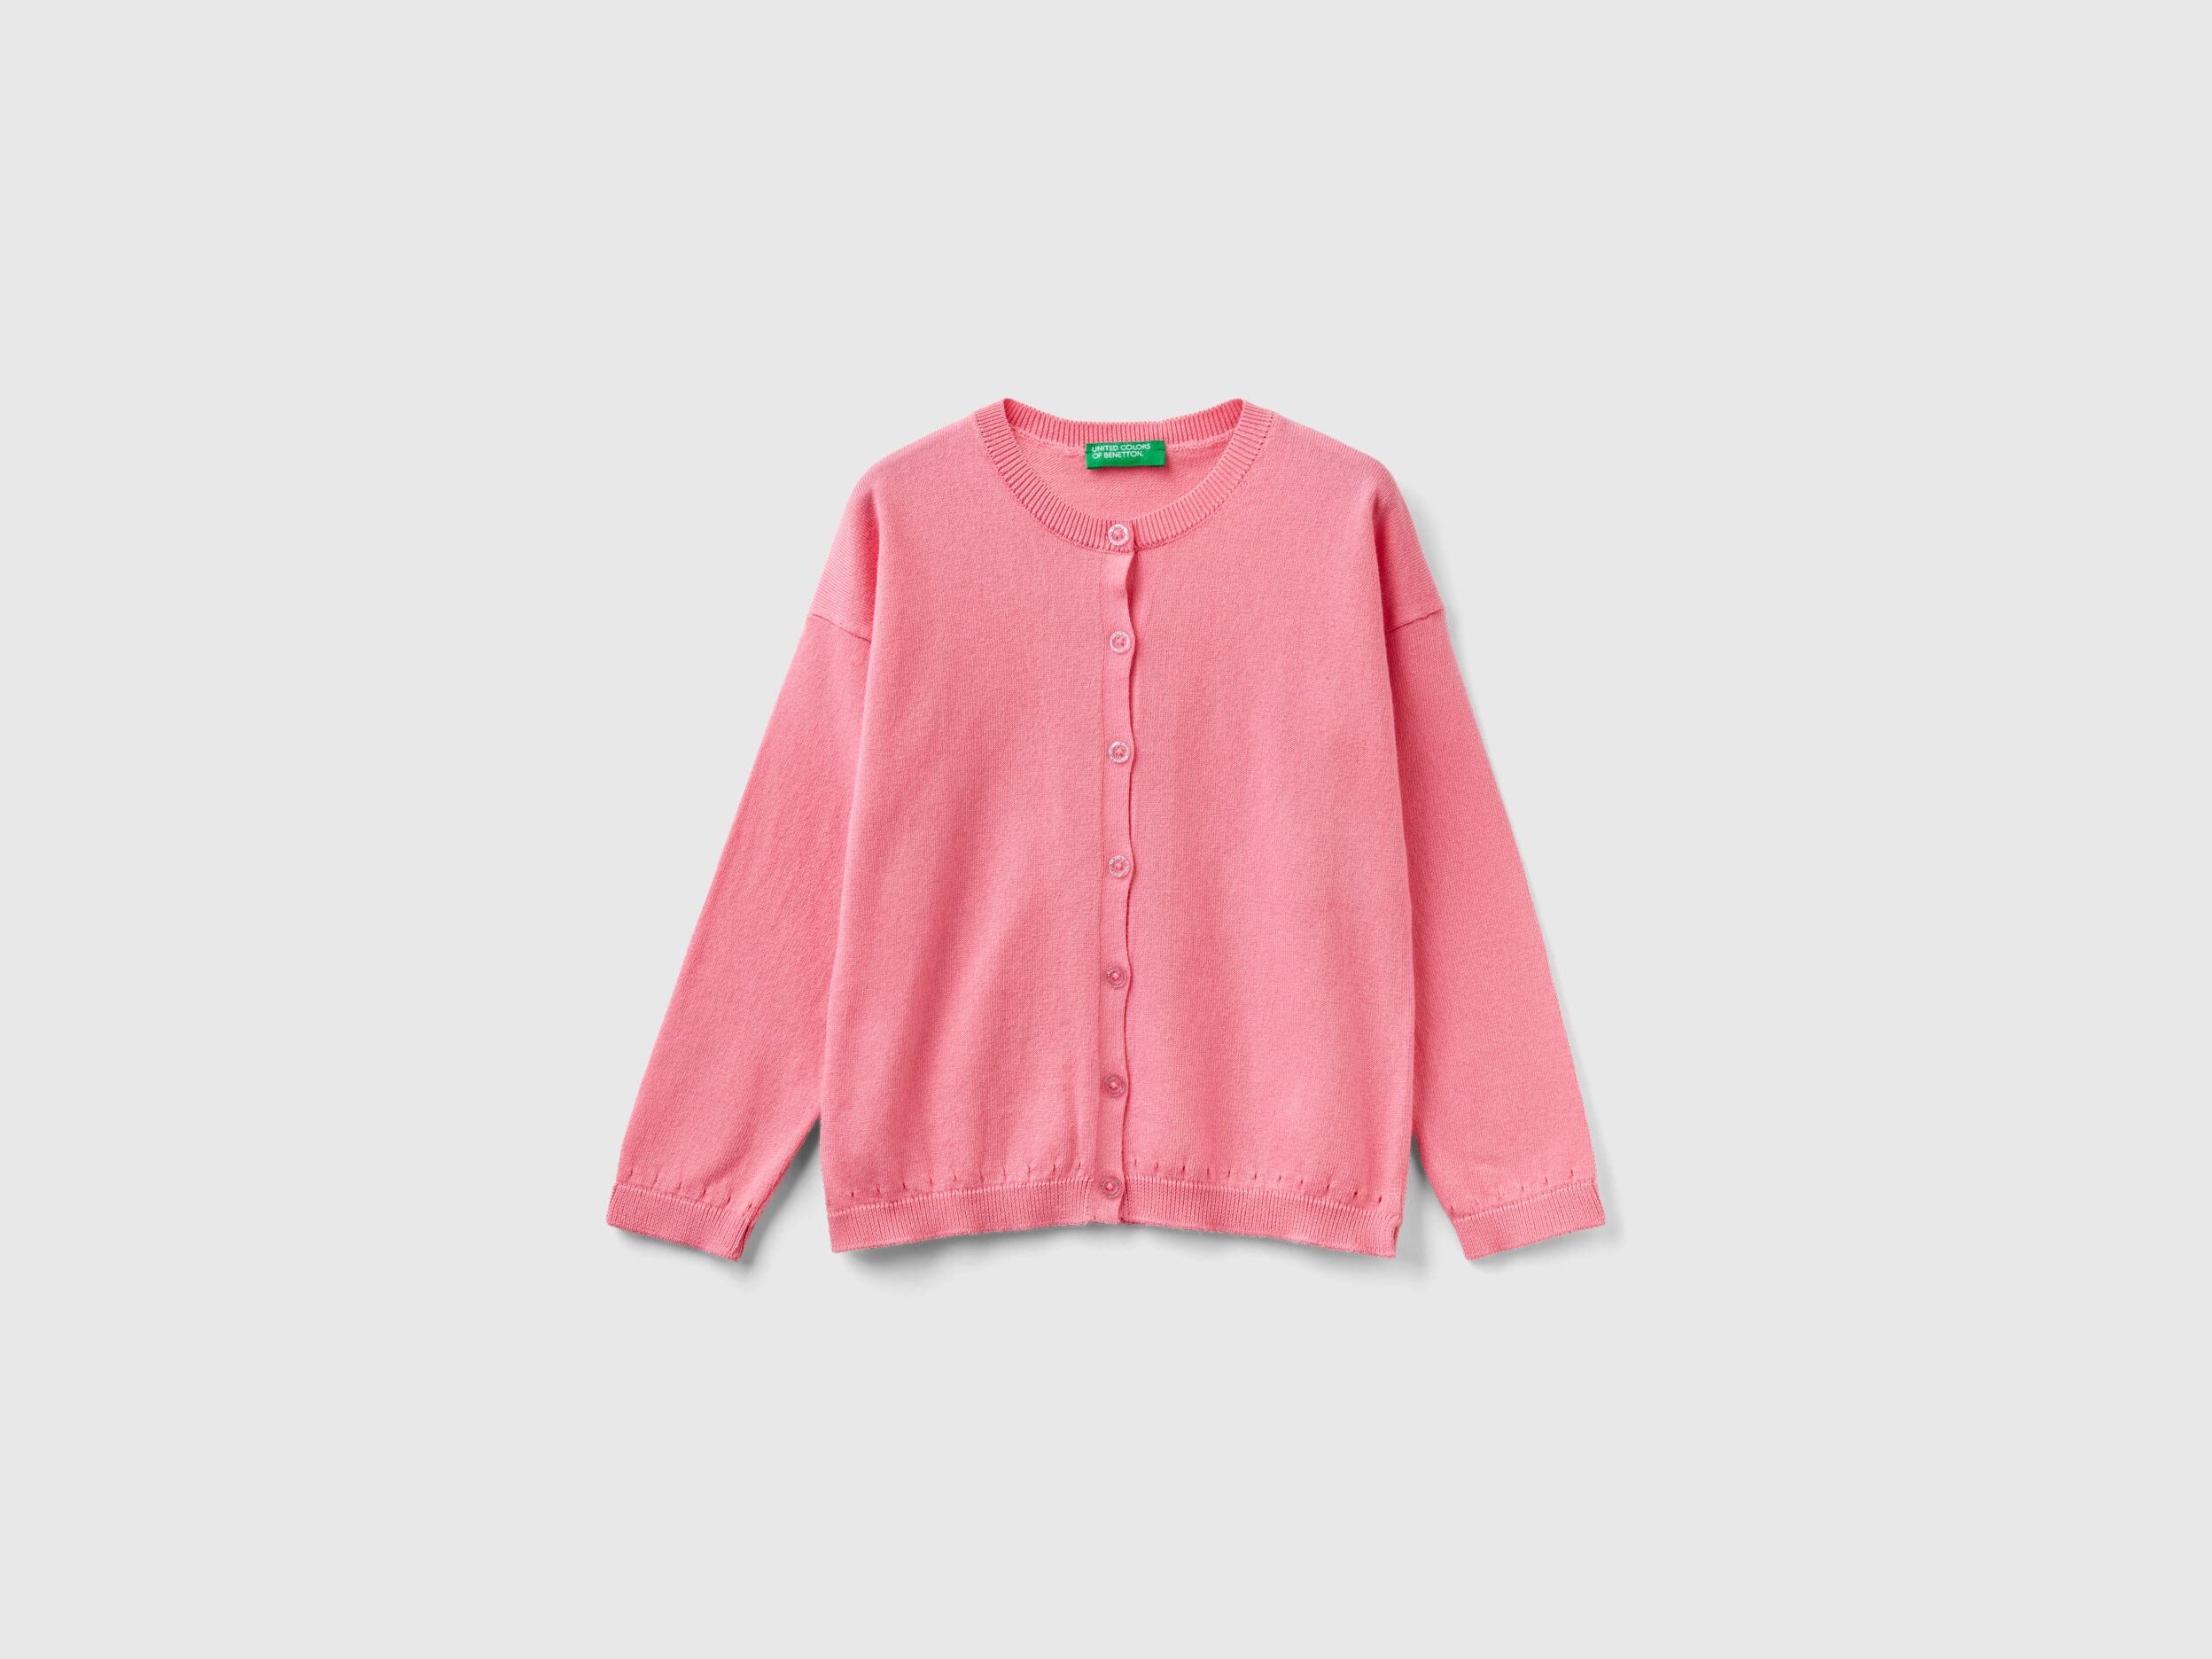 United Benetton, Cardigan With Glittery Buttons, size 4-5, Pink, Kids